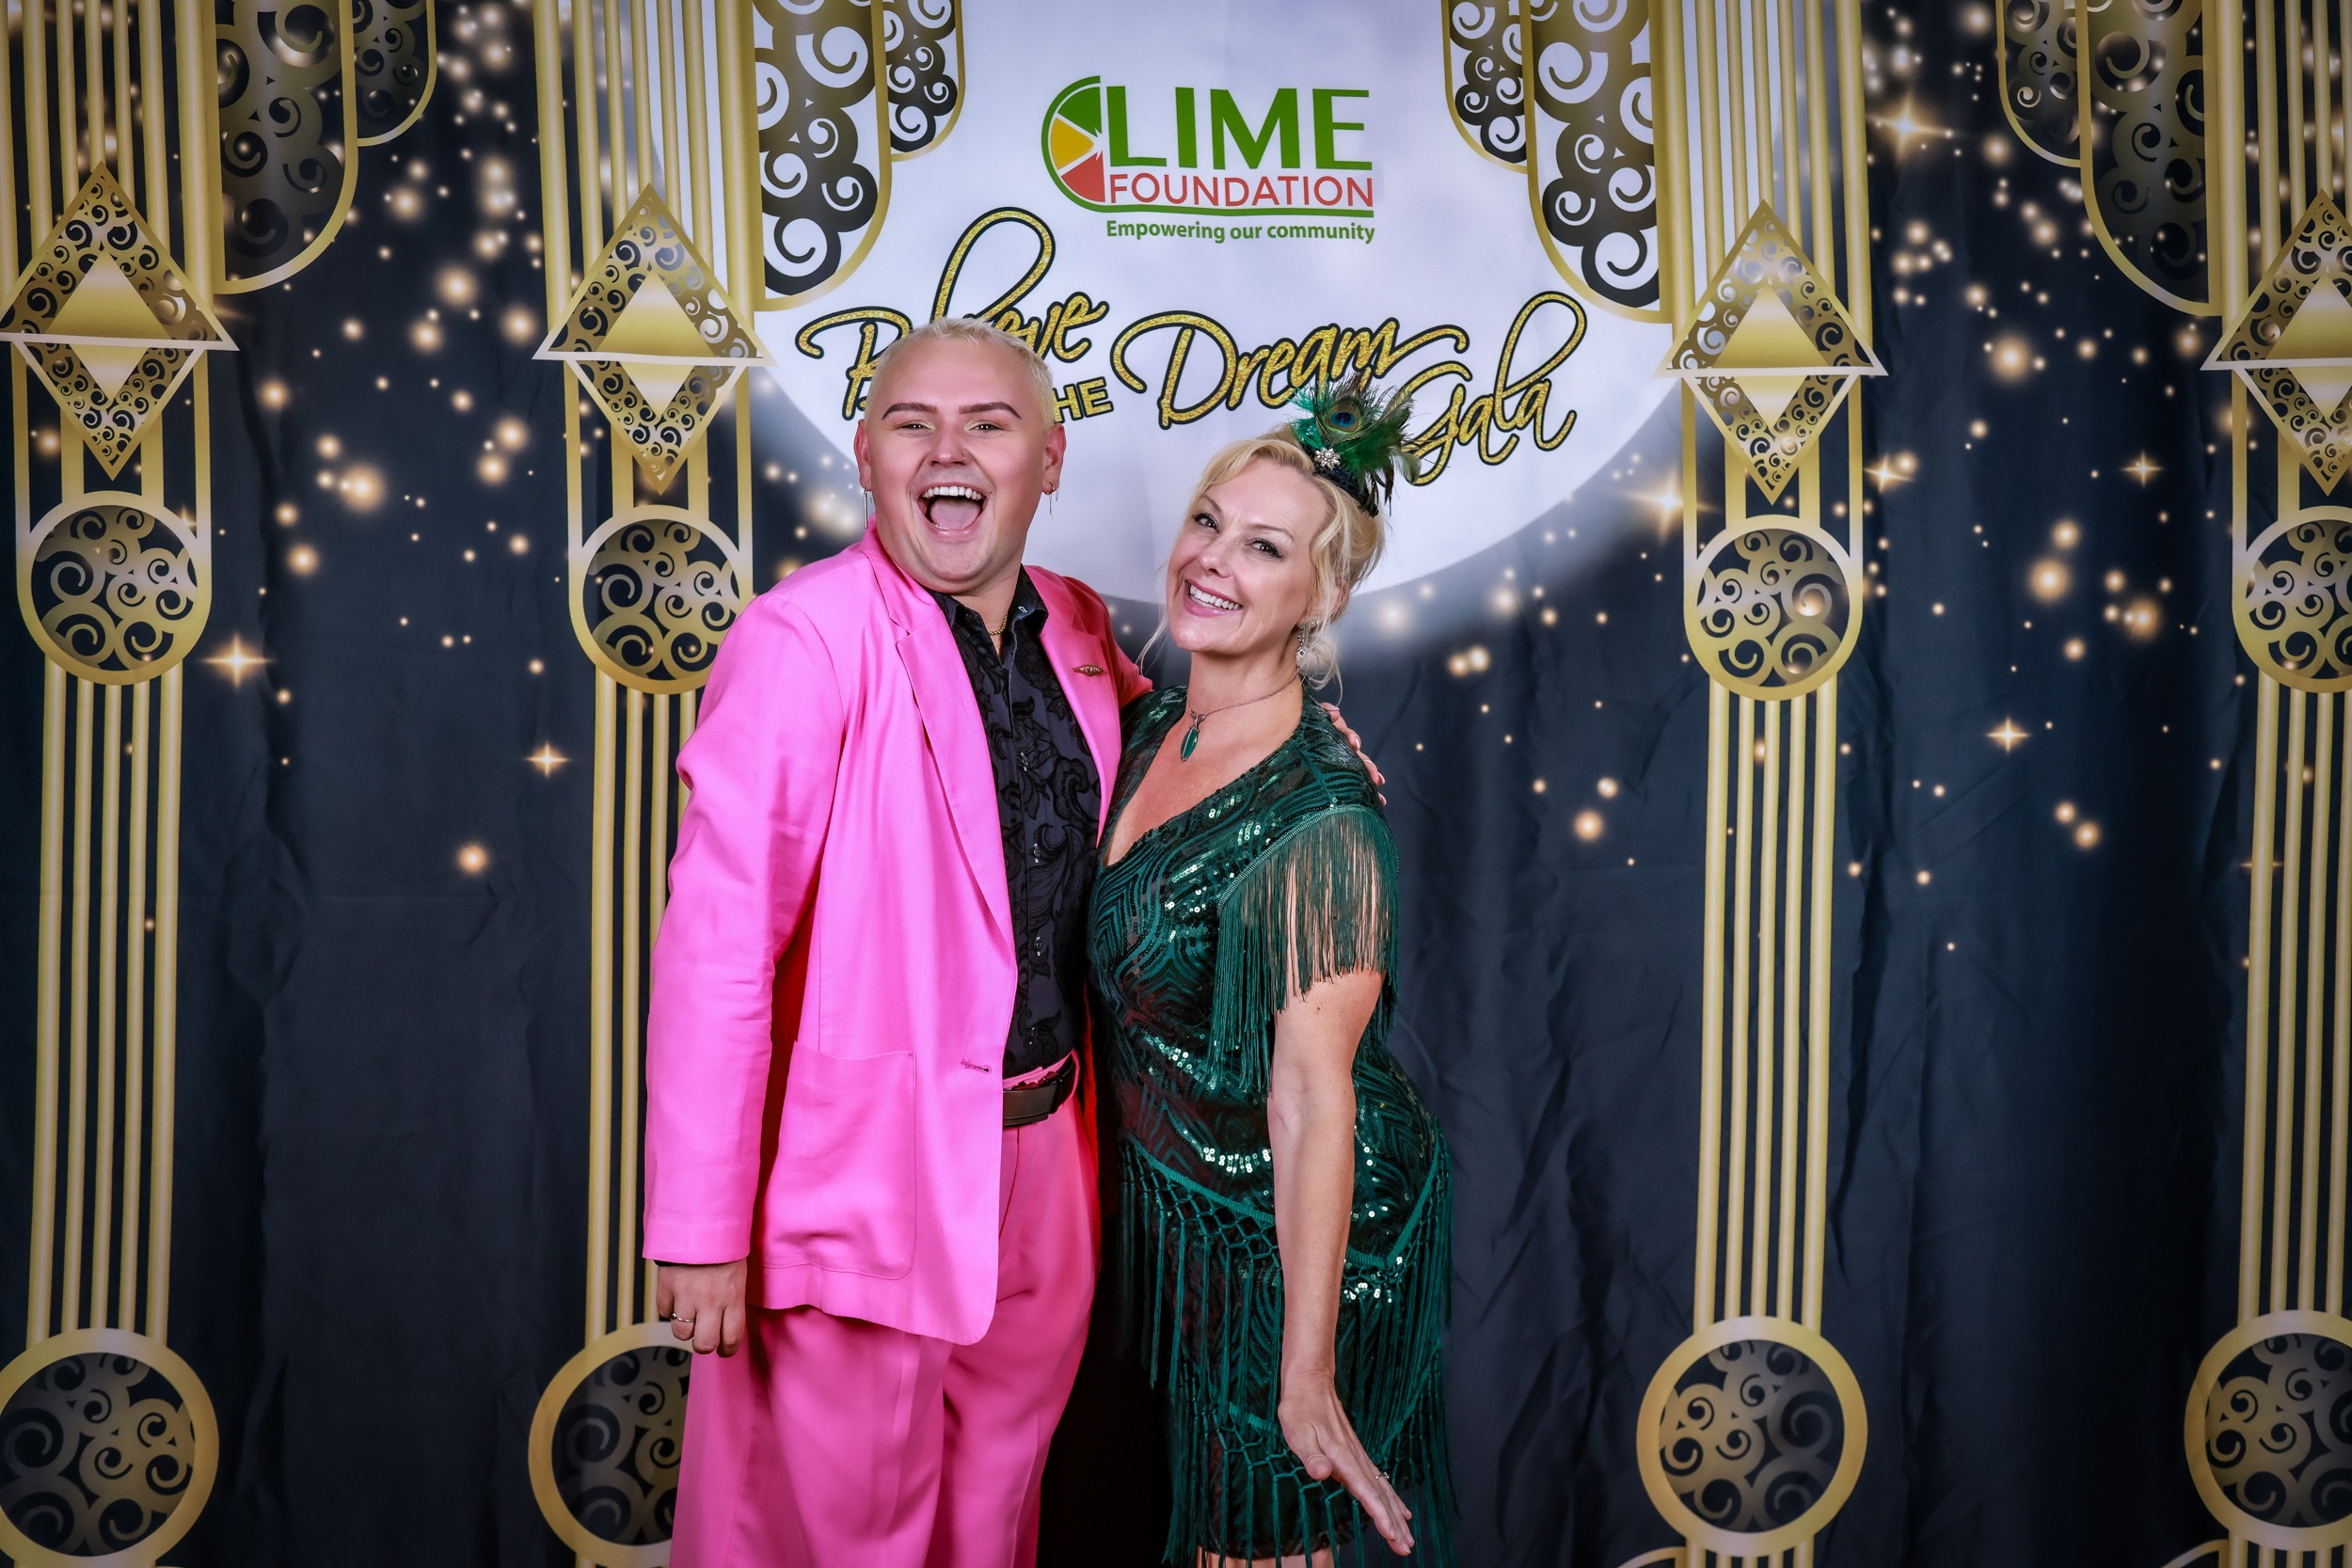 A man and woman posing for a photo in a pink outfit at The LIME Foundation of Santa Rosa, a Sonoma County Non-Profit Organization.